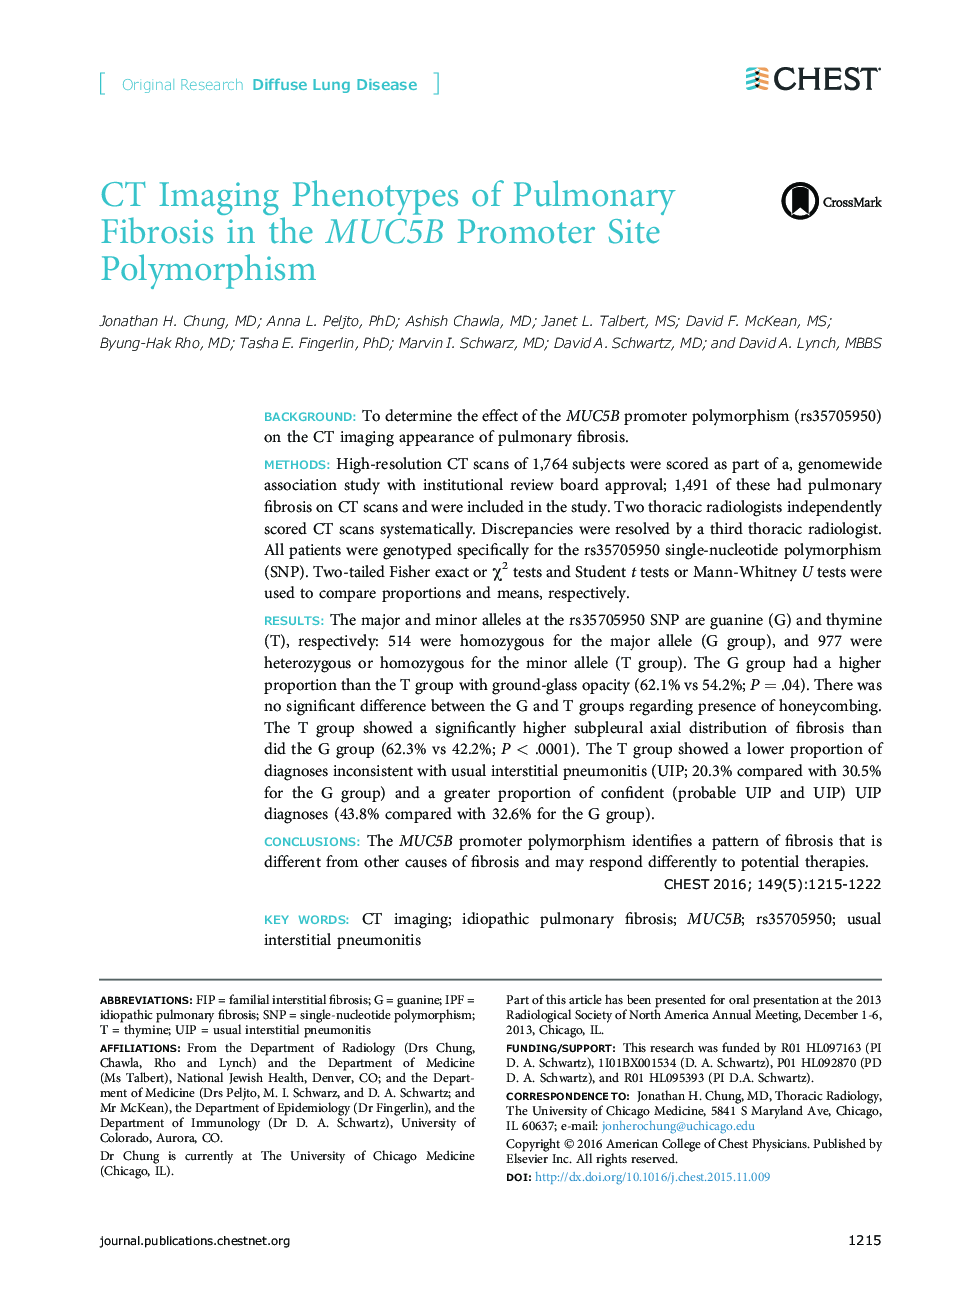 CT Imaging Phenotypes of Pulmonary Fibrosis in the MUC5B Promoter Site Polymorphism 